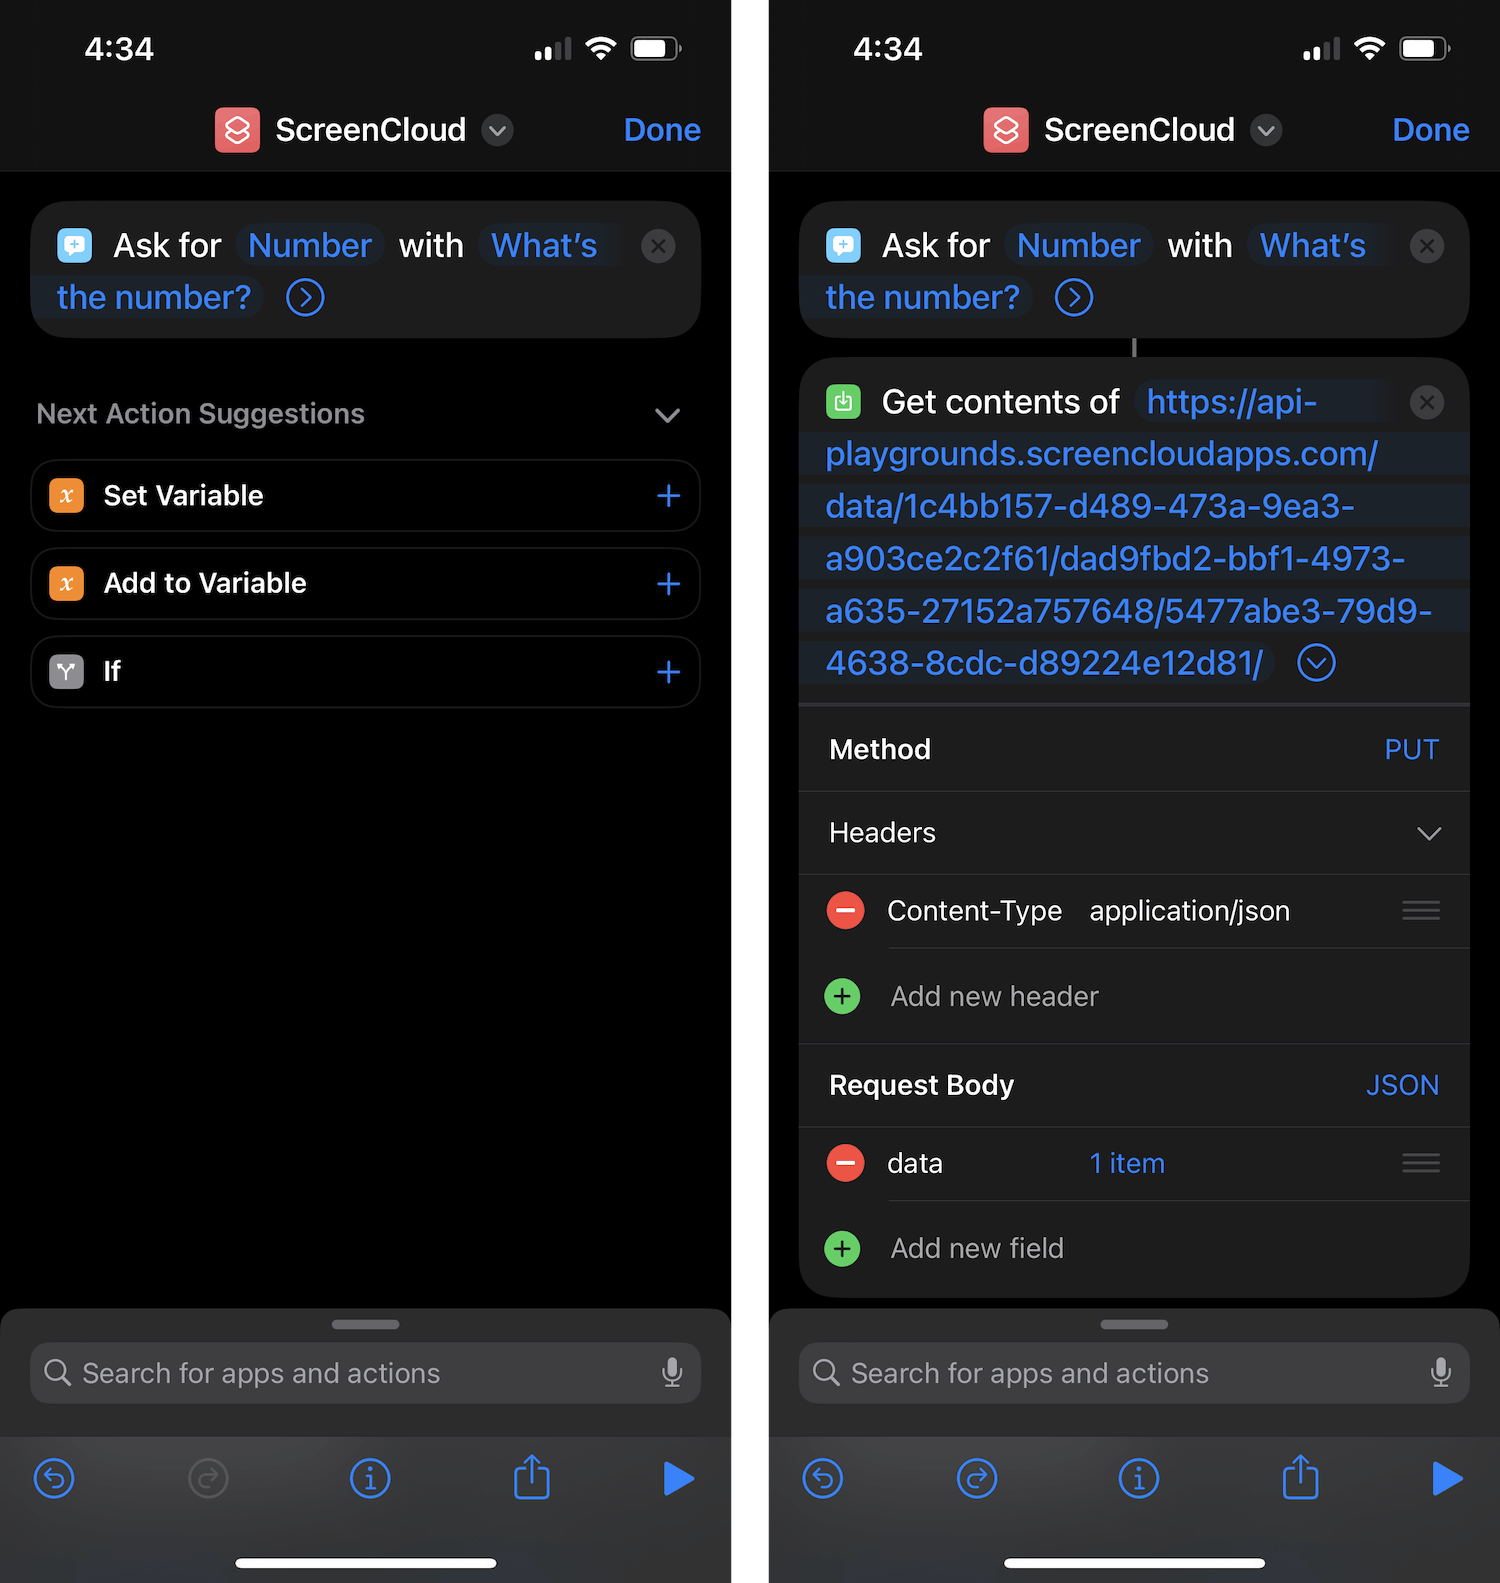 Screenshot of setting up Siri with Apple Shortcuts to send data to a Webhooks URL